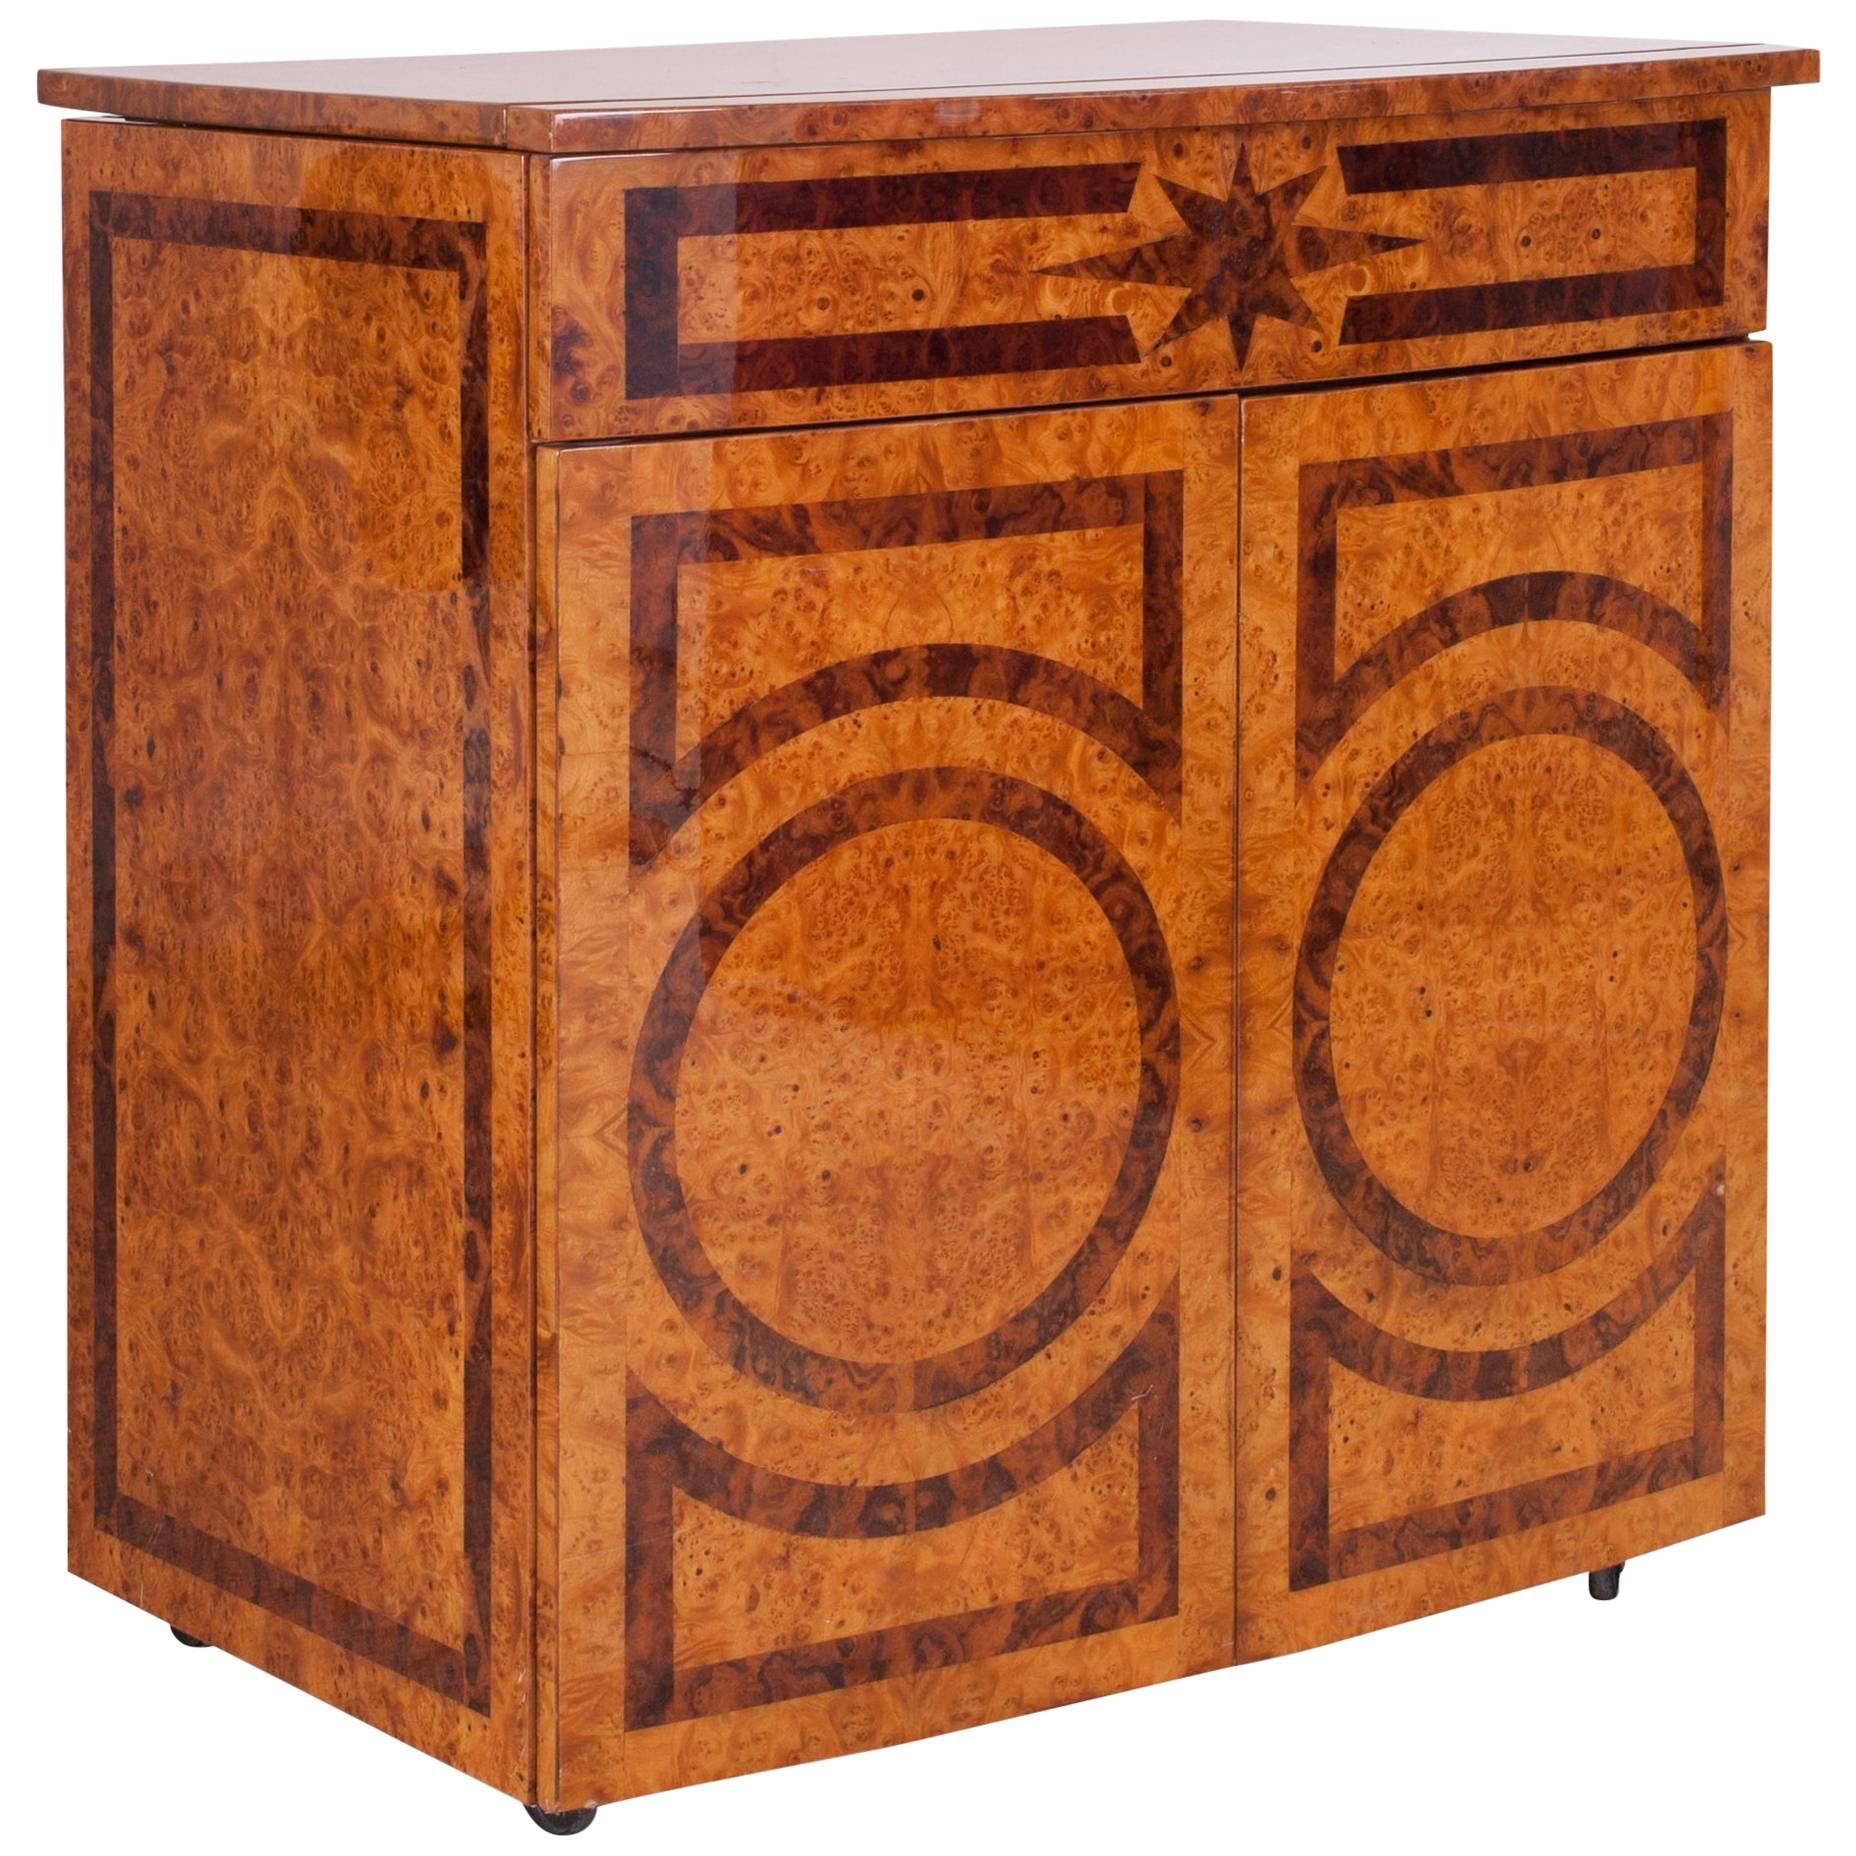 Hollywood regency Lacquered dry bar Cabinet with Burl Inlay